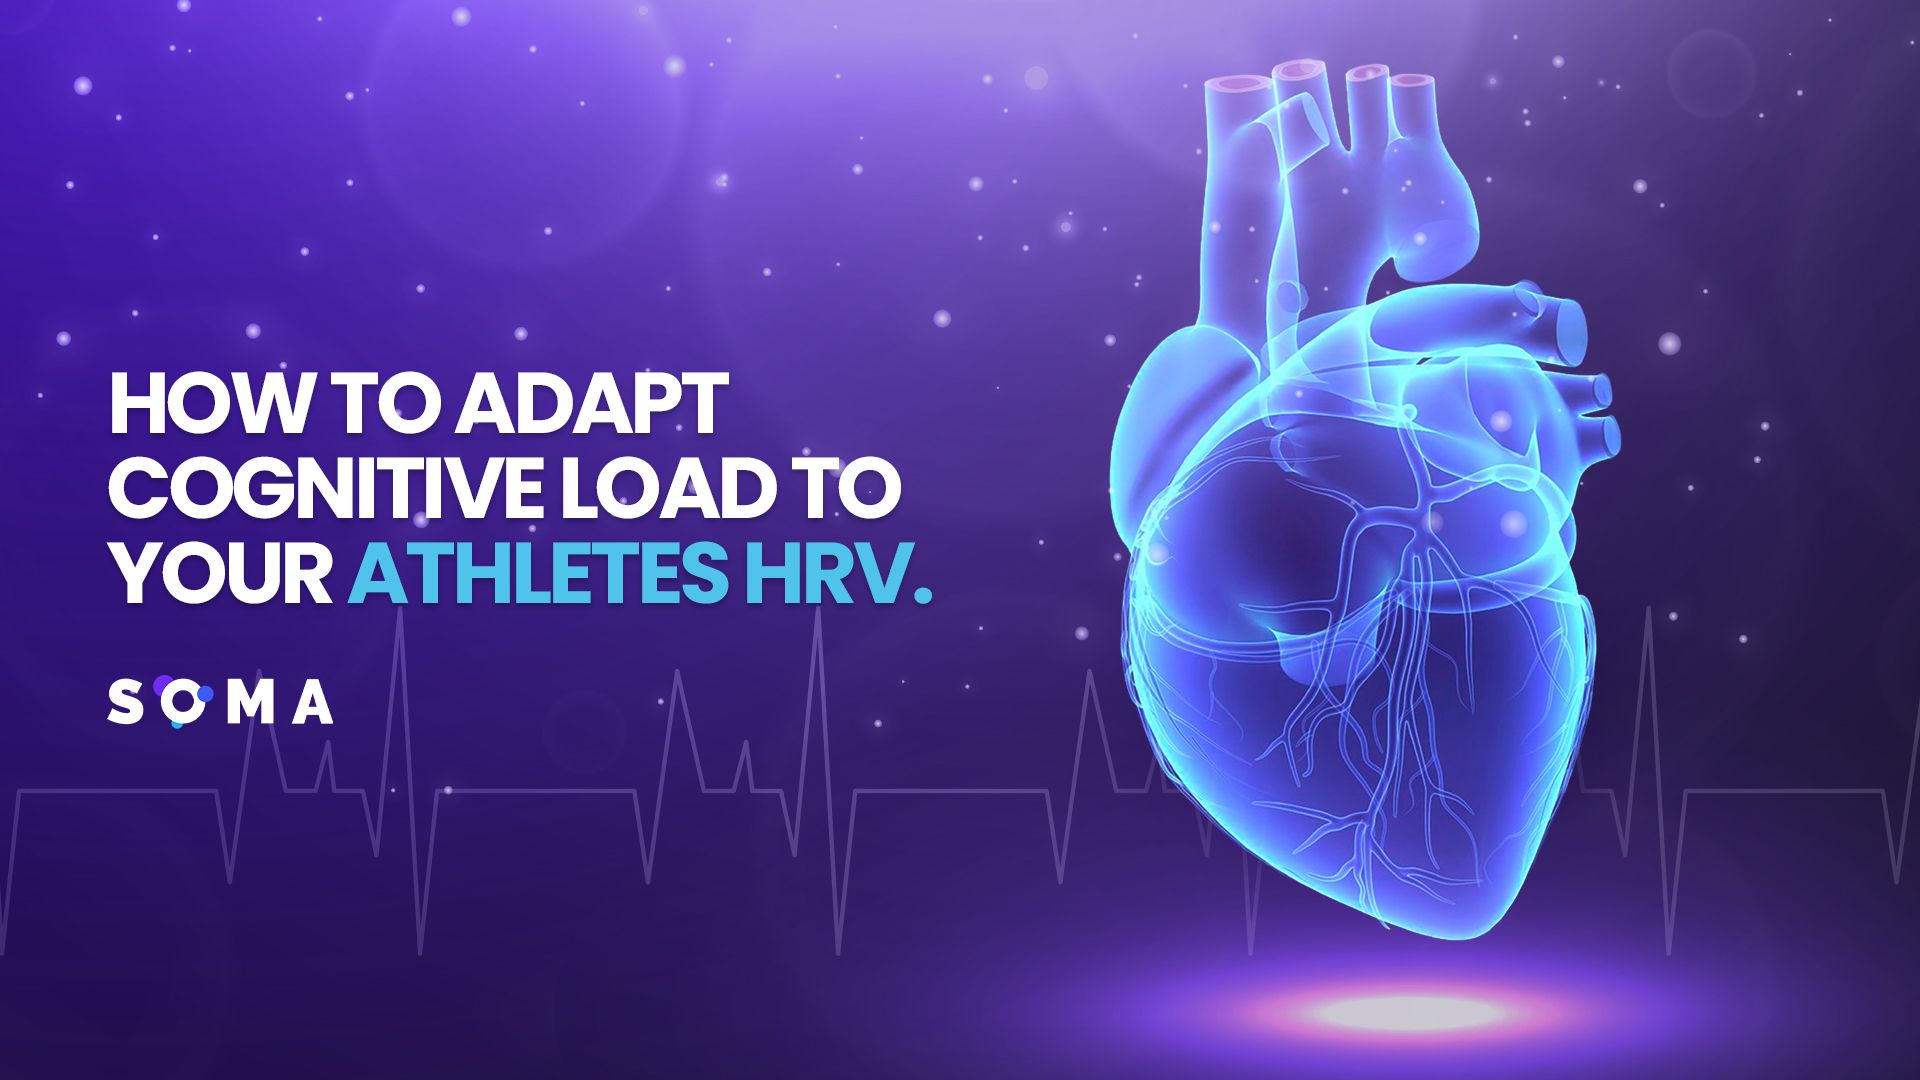 How To Adapt Cognitive Load To Your Athletes HRV.